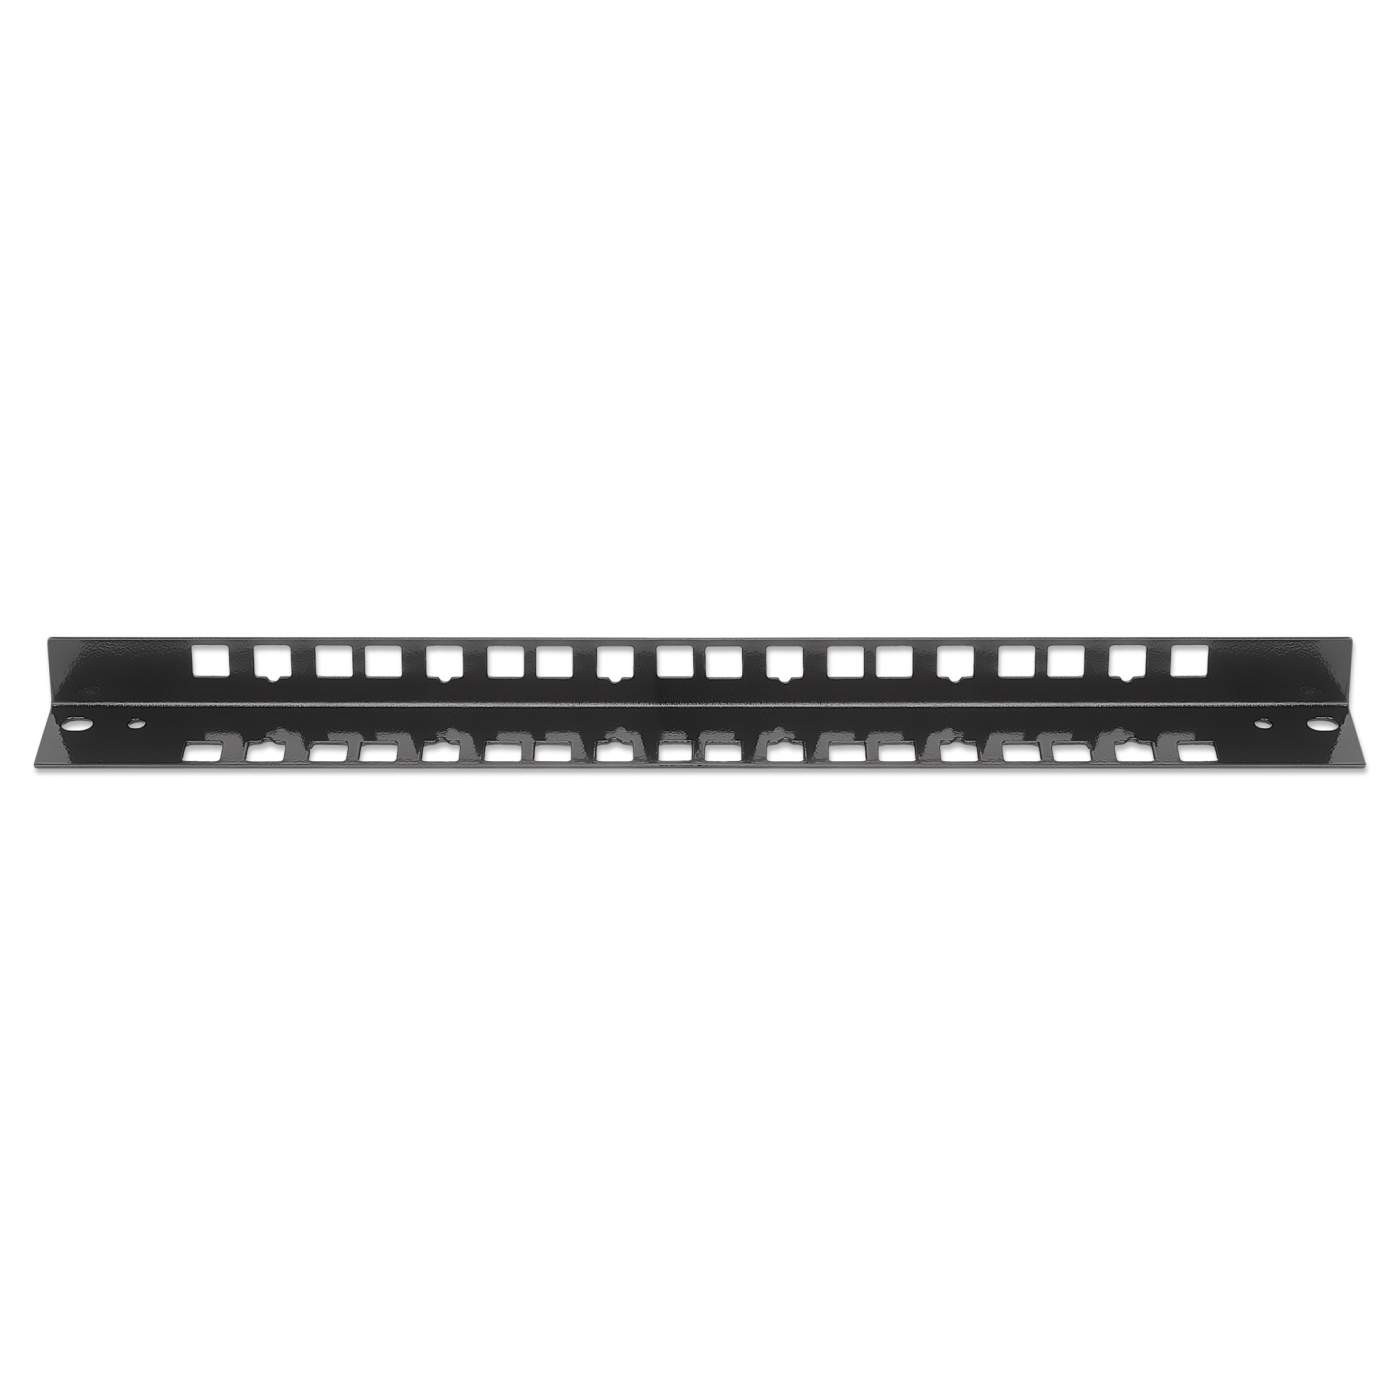 Spare Rails for 19" Wallmount Cabinets, 6U Image 3